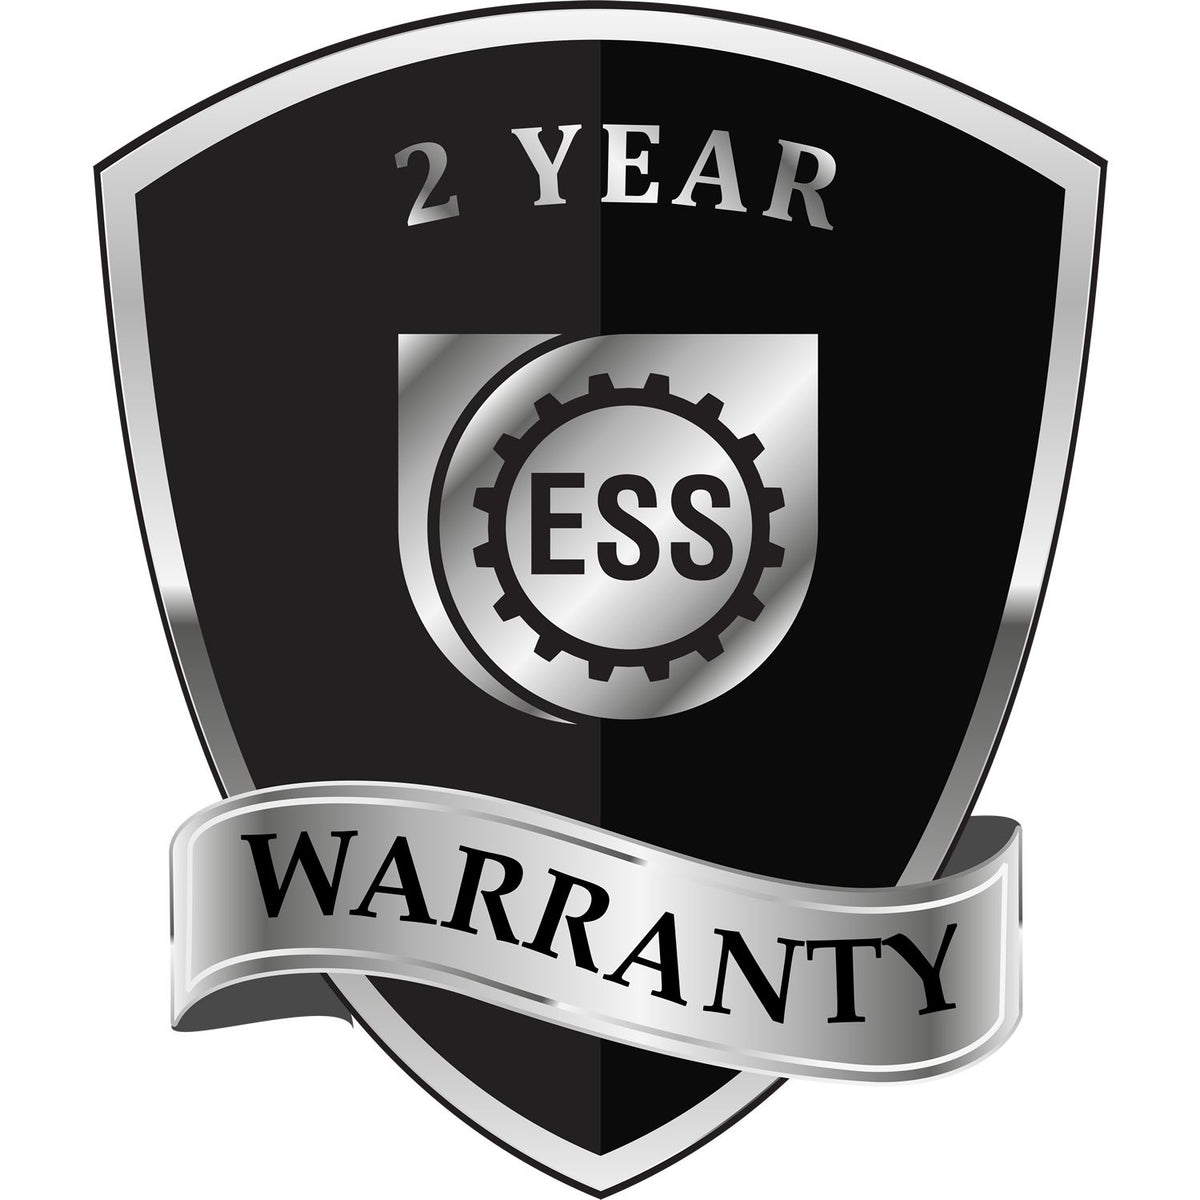 A black and silver badge or emblem showing warranty information for the State of Wyoming Extended Long Reach Geologist Seal